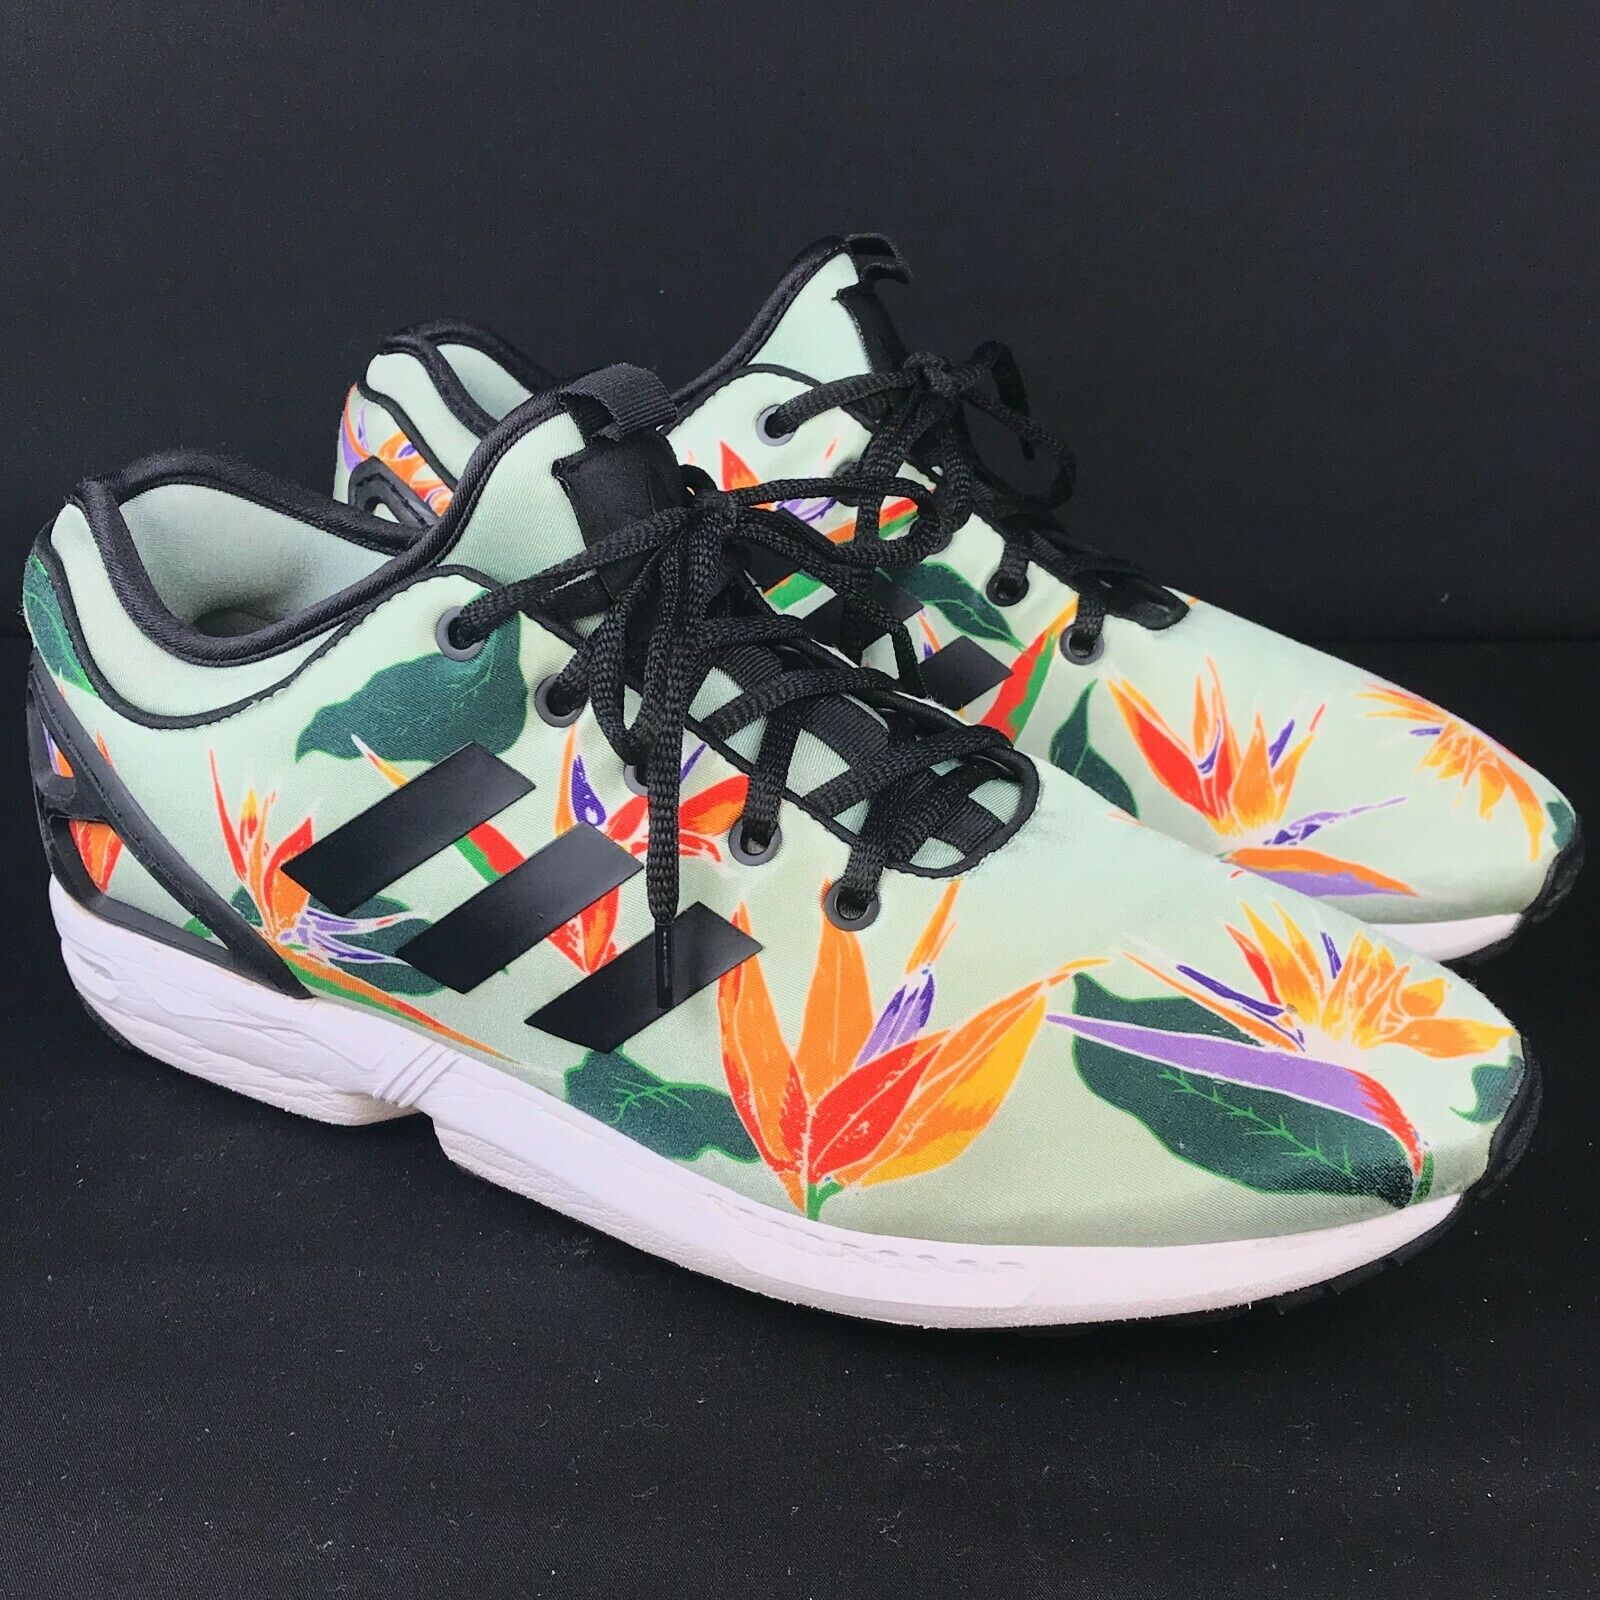 Adidas ZX Flux NPS Men's Running Shoes Lace Up Floral Pattern Size 10.5 US VGUC!